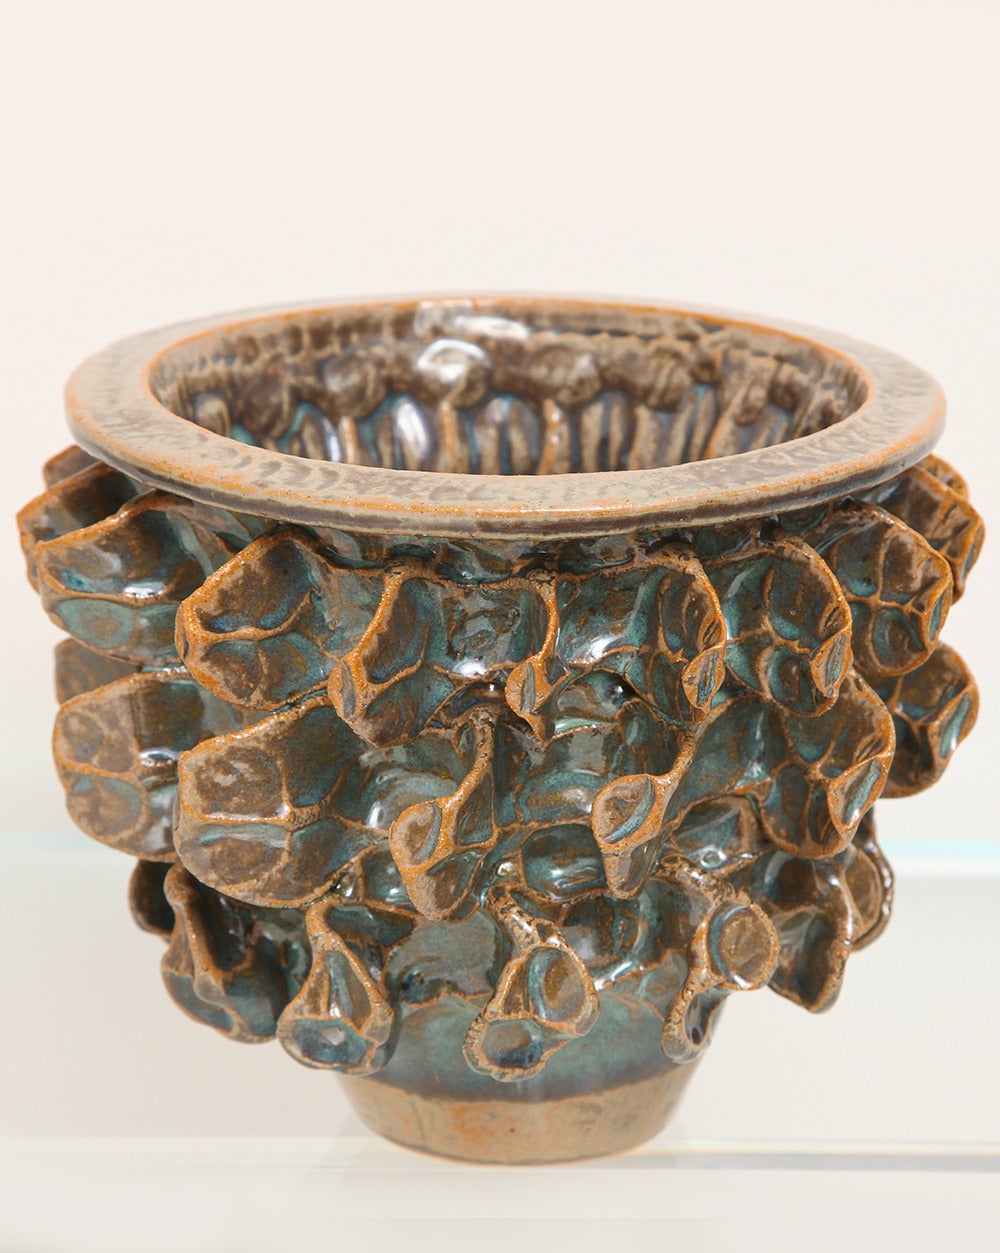 PAUL BRIGGS
Foliage Vase 2
Ceramic vessel with hand-pinched ivy leaf decoration and multicolor glaze.  
American, 2015